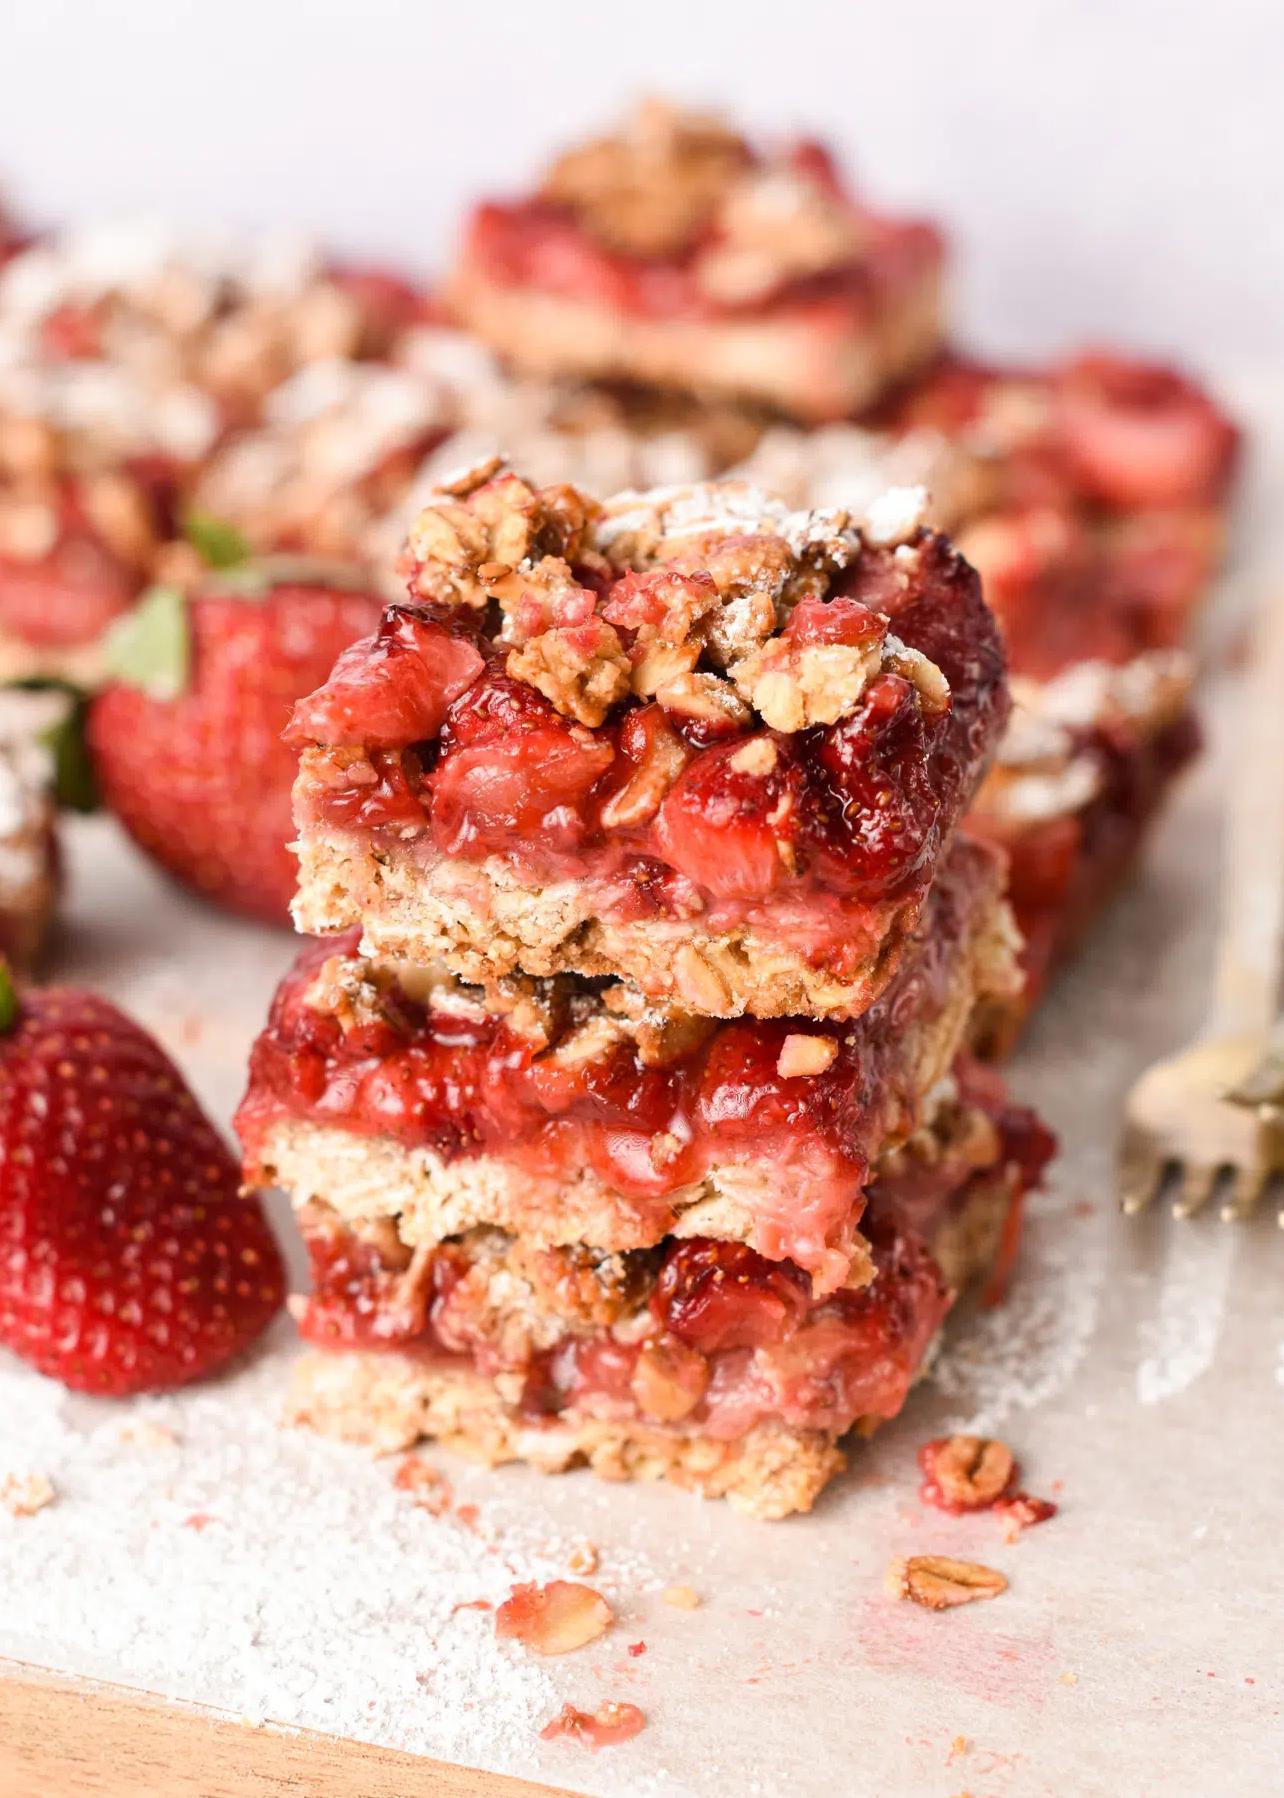  Gluten-free and dairy-free? These bars have got you covered.